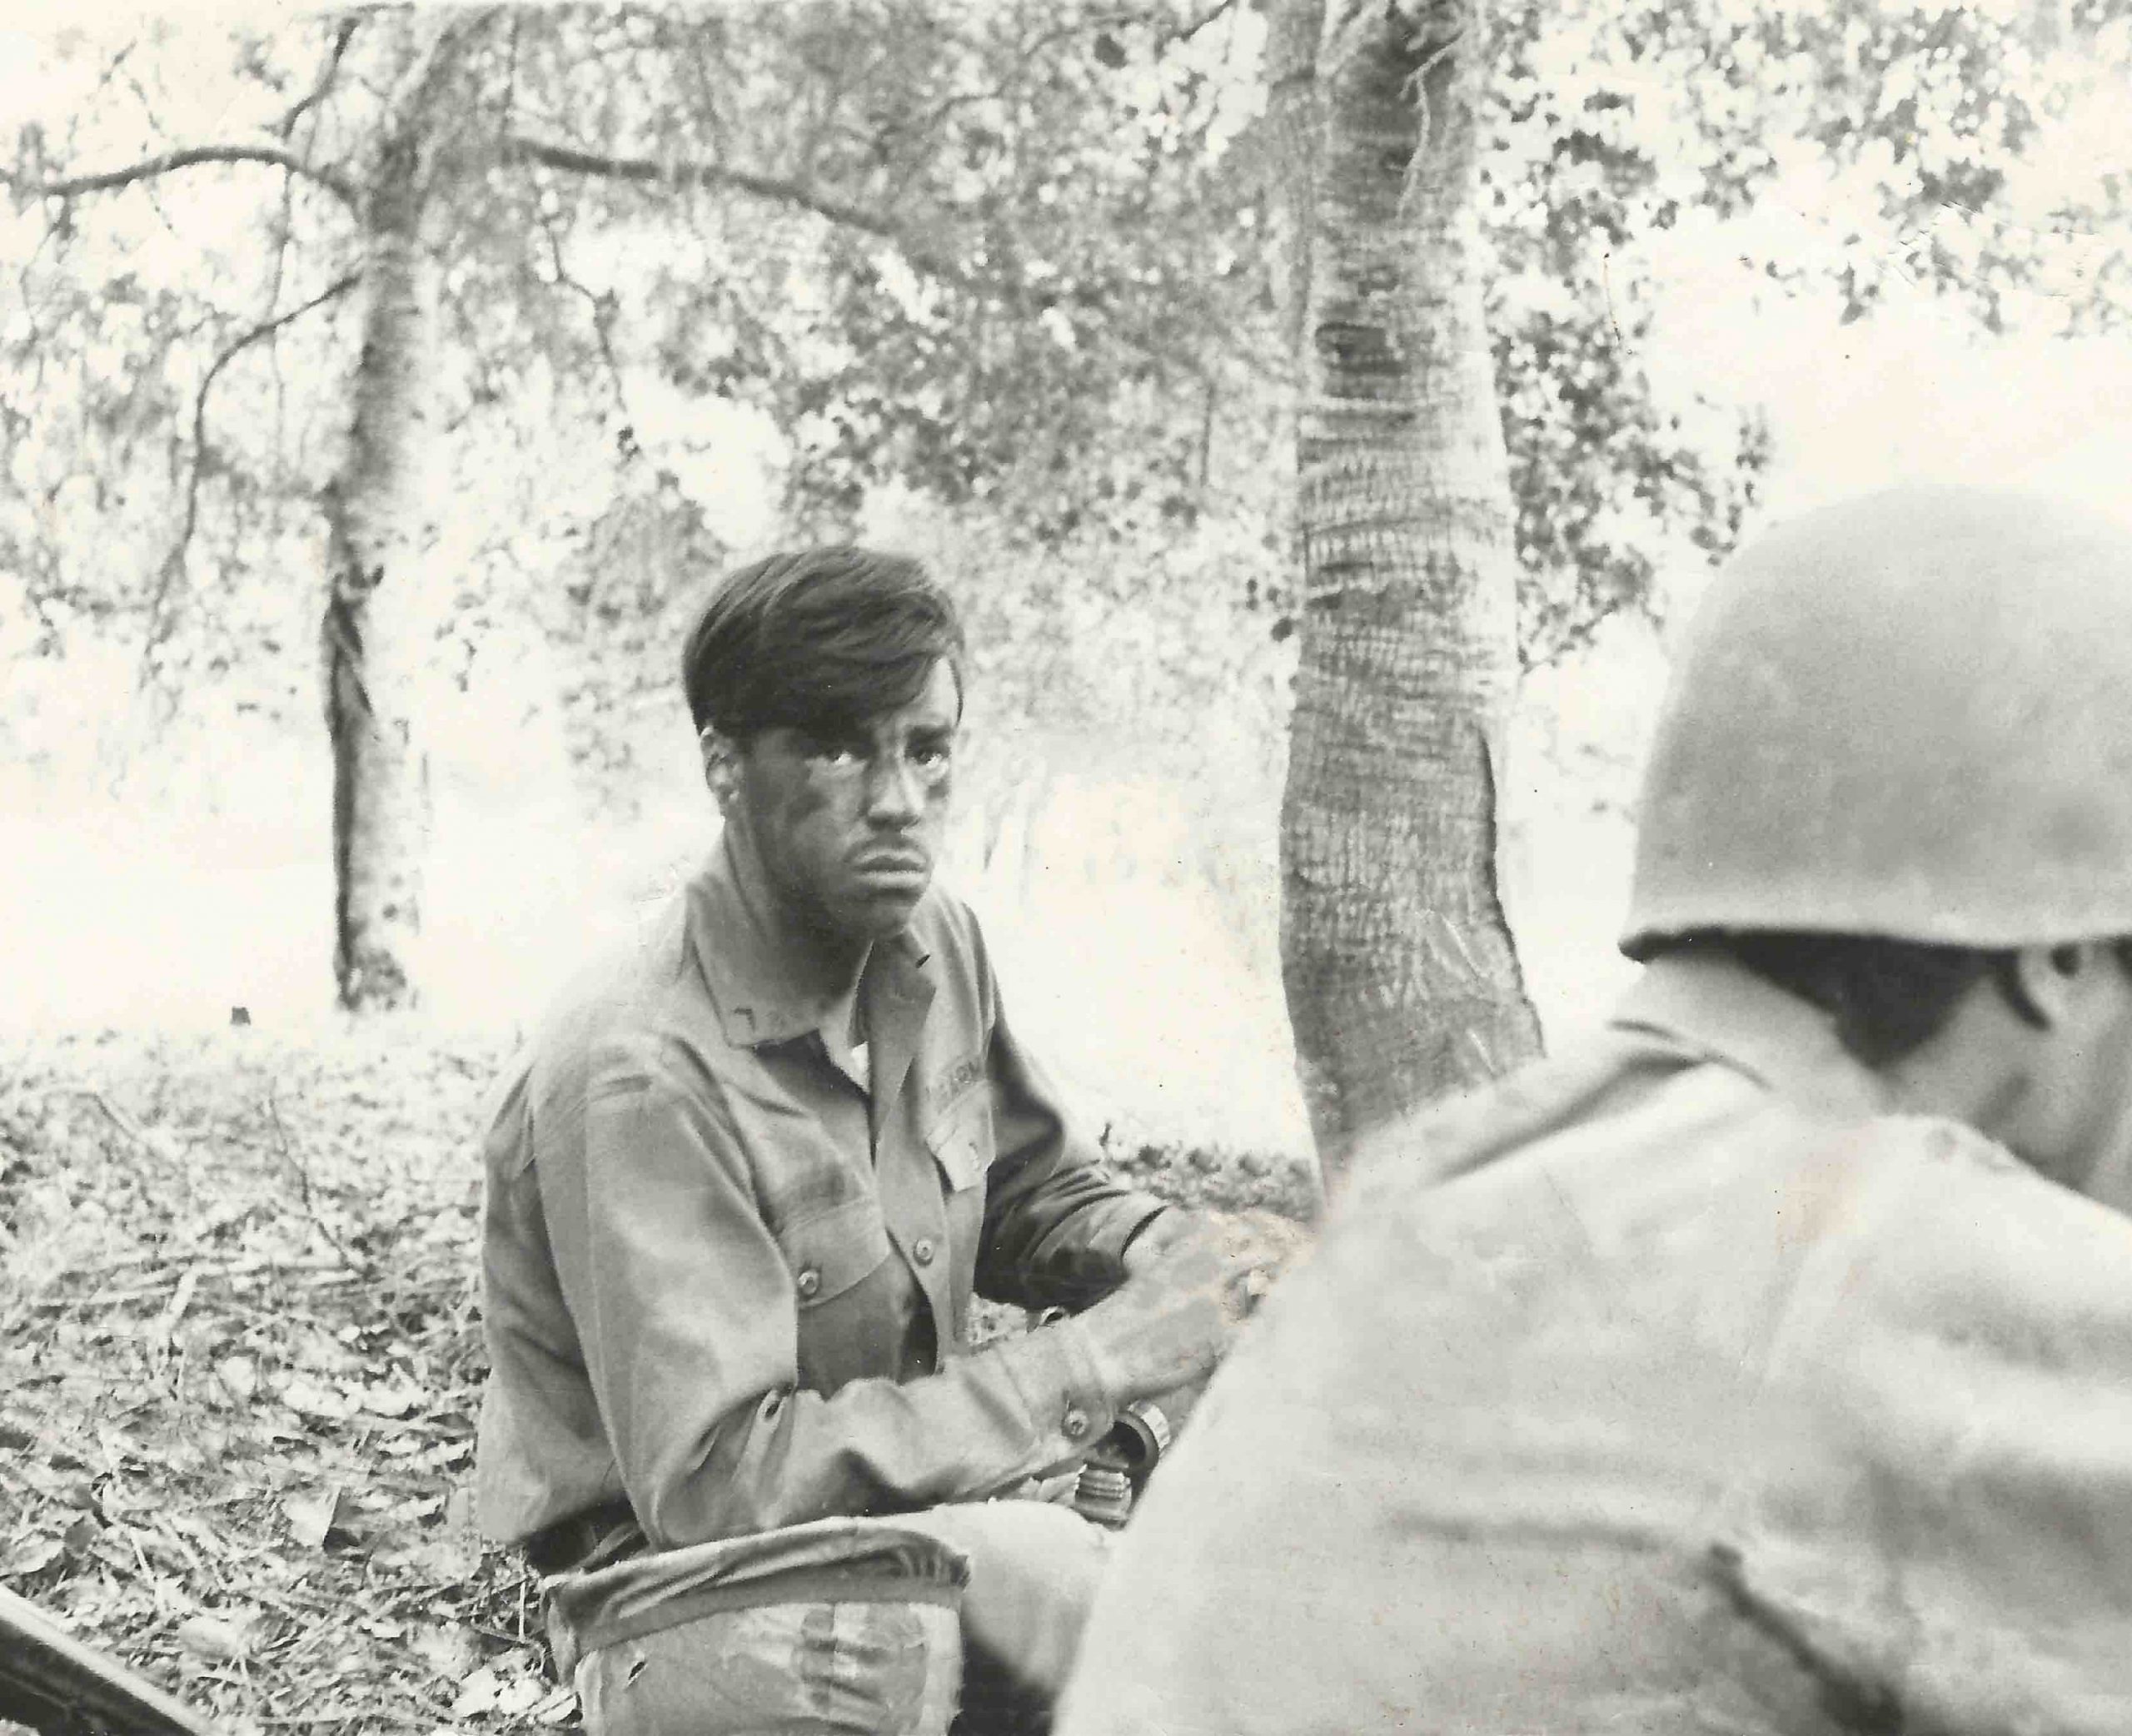 boise photographer dad in the army sitting in the forest with face painted looking serious with another army man in front.  cool black and white photo